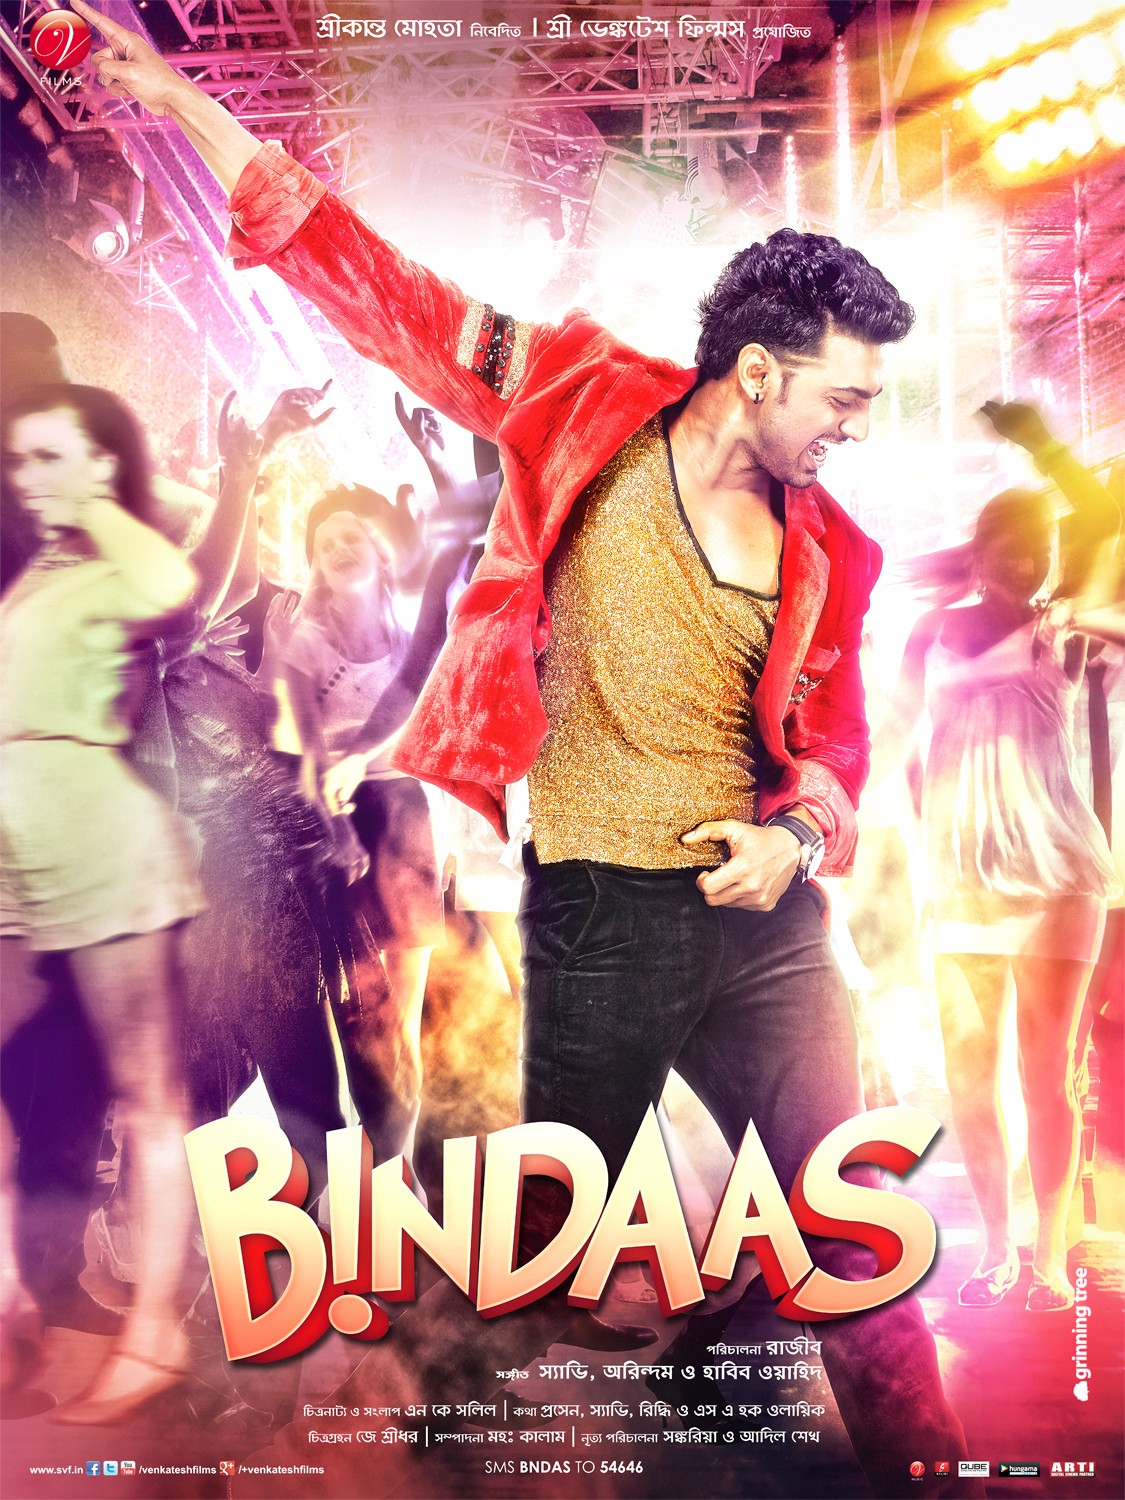 Extra Large Movie Poster Image for Bindaas (#7 of 7)